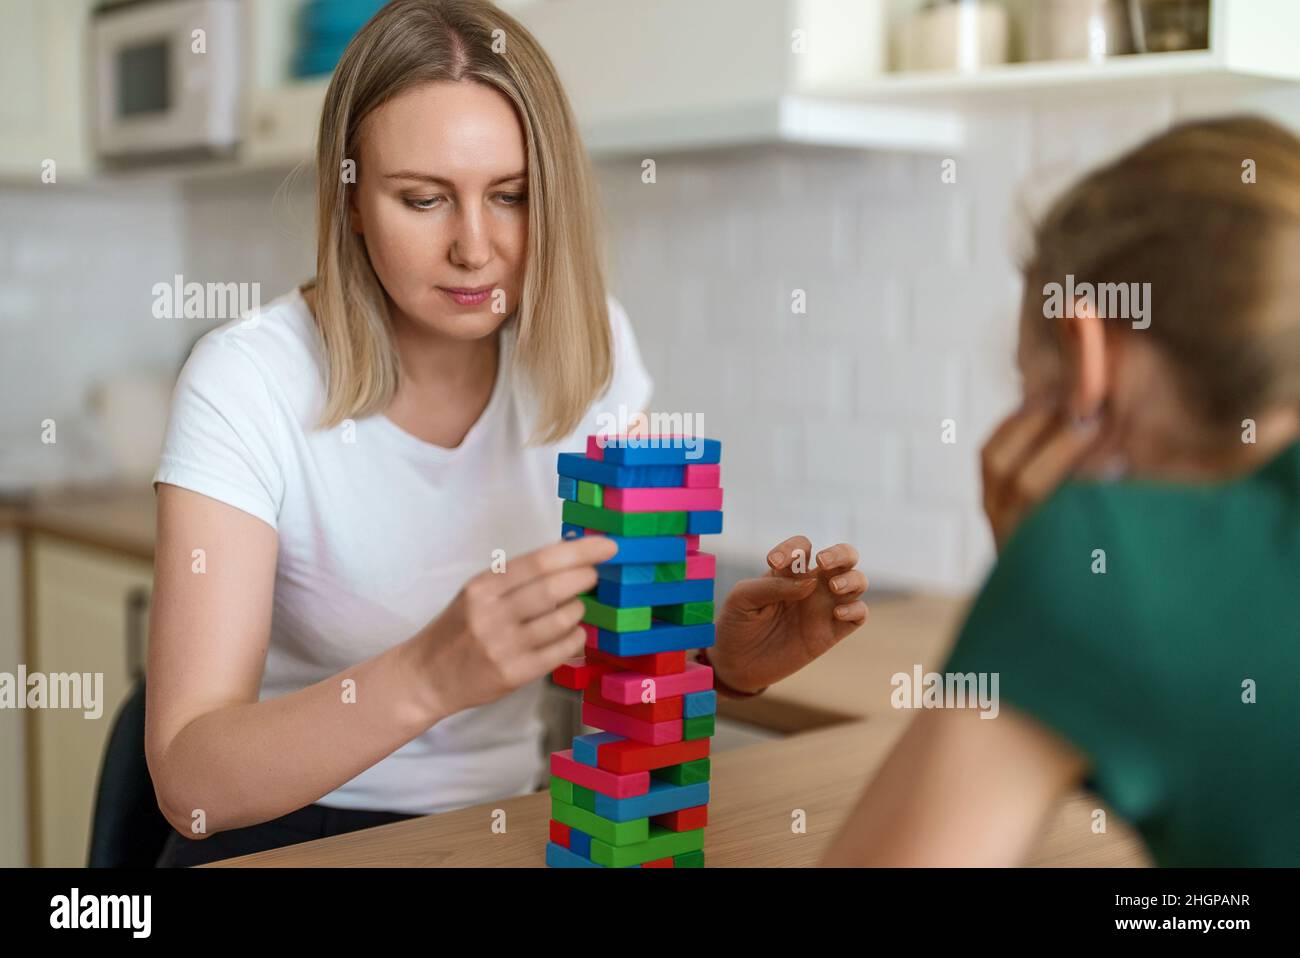 Woman and daughter playing jenga tower game at home. Stock Photo